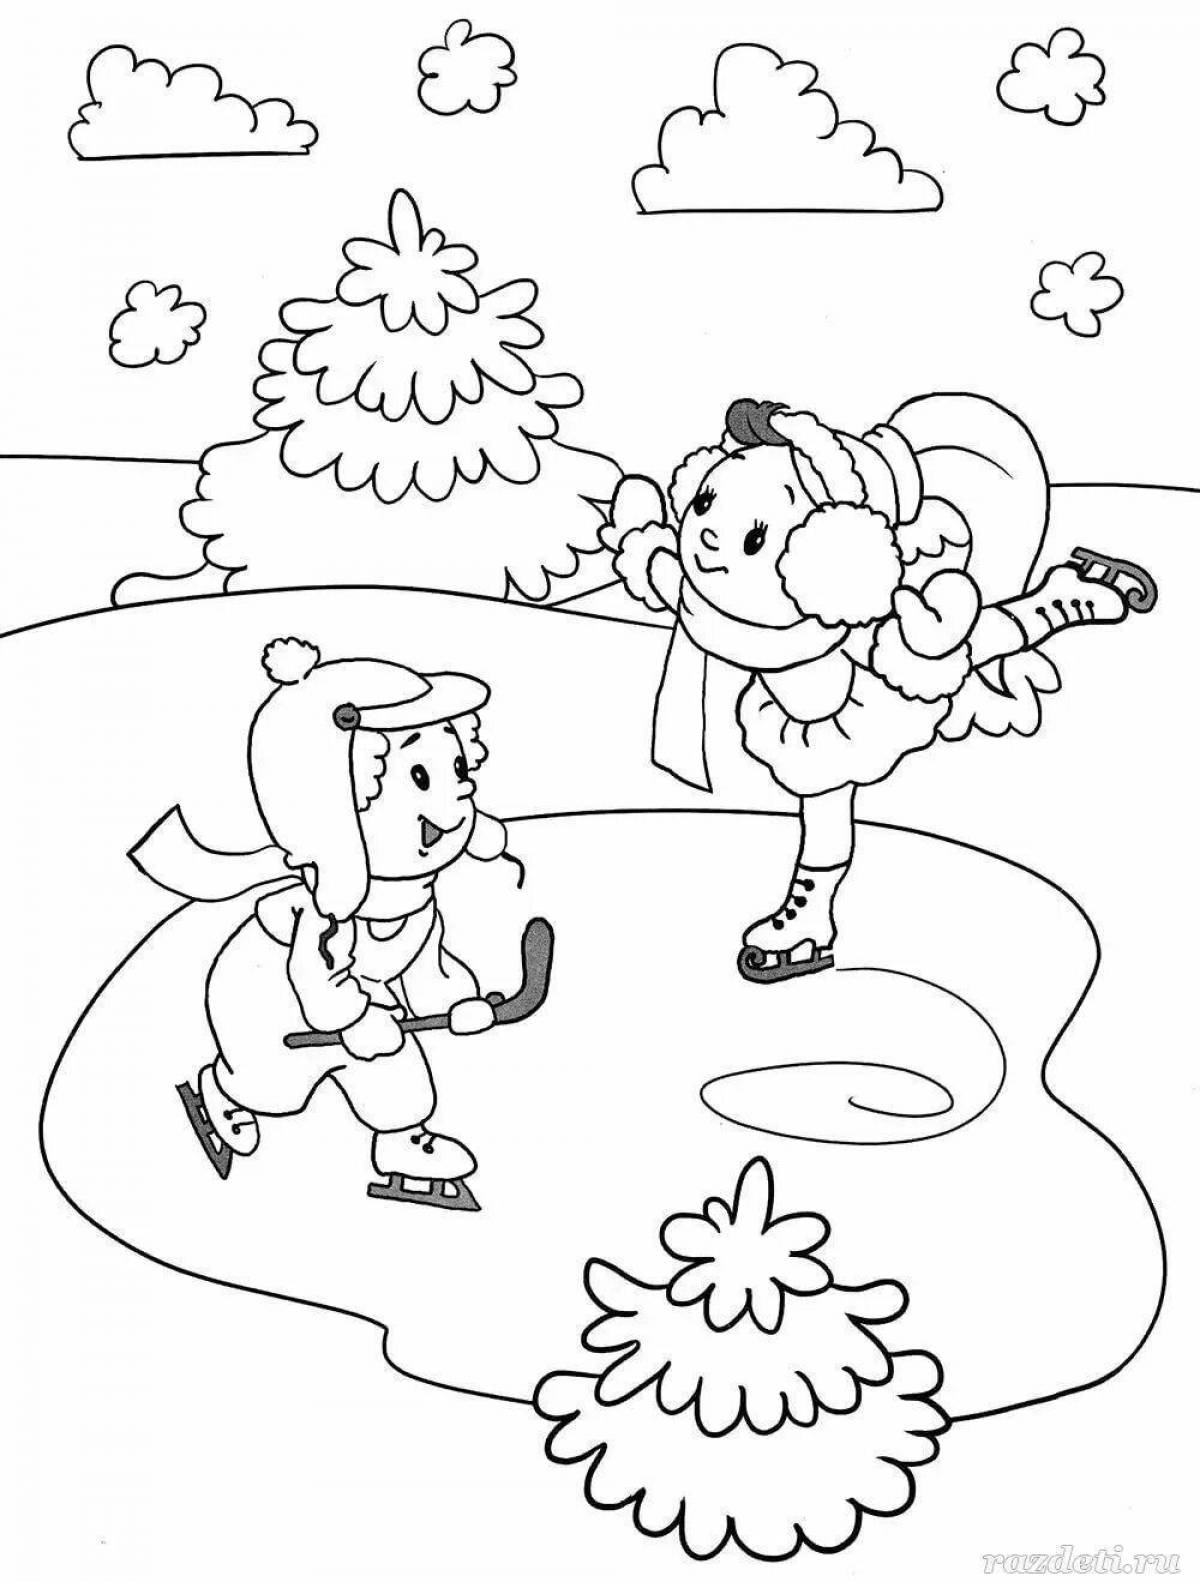 Coloring page enthusiastic winter activities